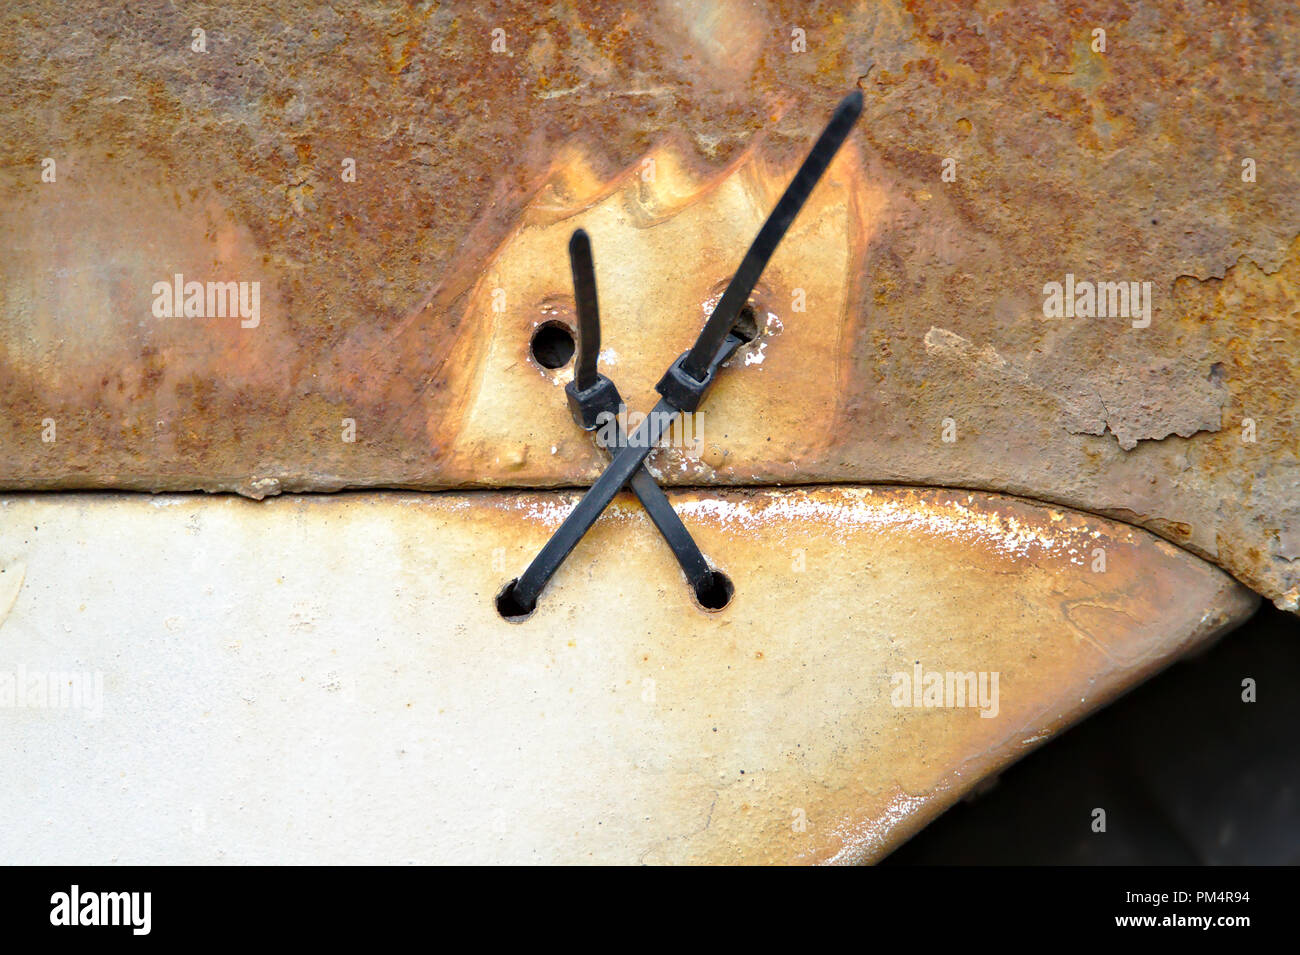 Detailed photo of two cable ties holding a rear bumper of old very rusty car. Stock Photo